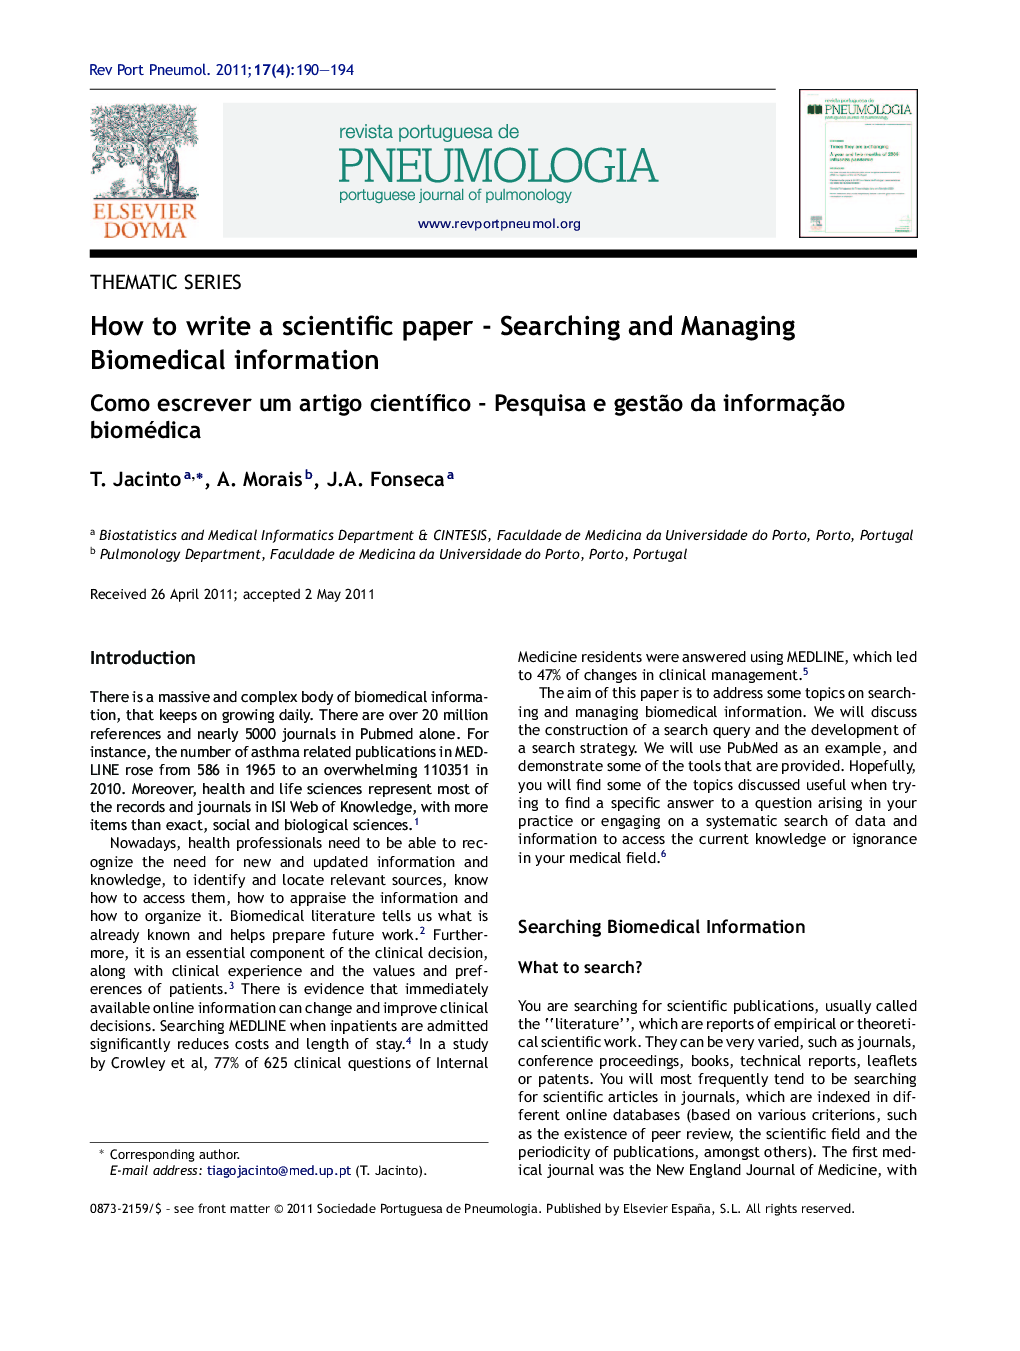 How to write a scientific paper - Searching and Managing Biomedical information